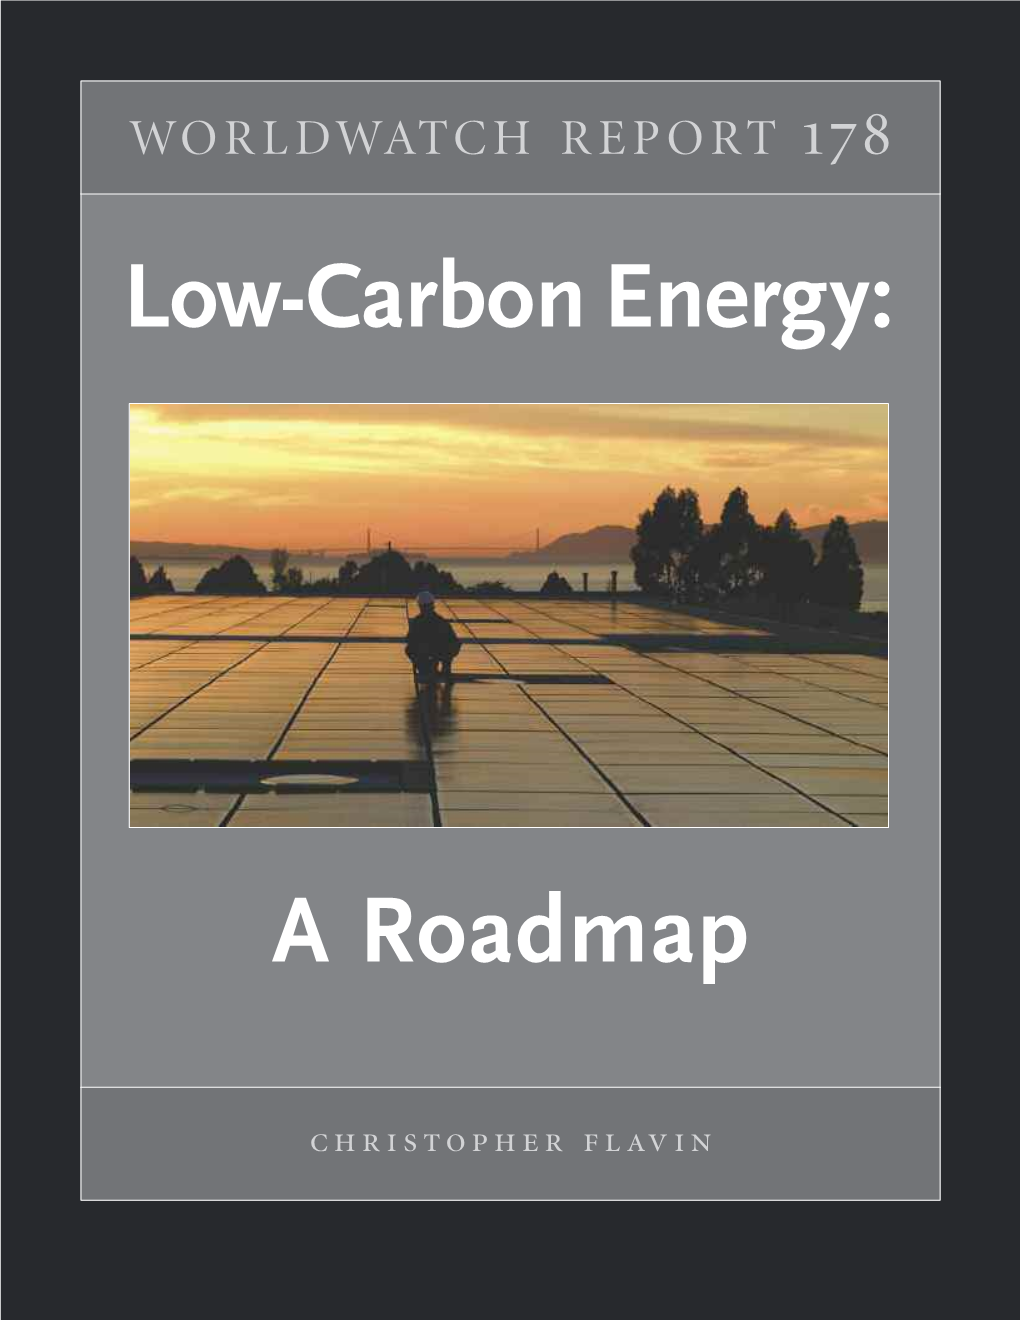 LOW-CARBON ENERGY: a ROADMAP Summary